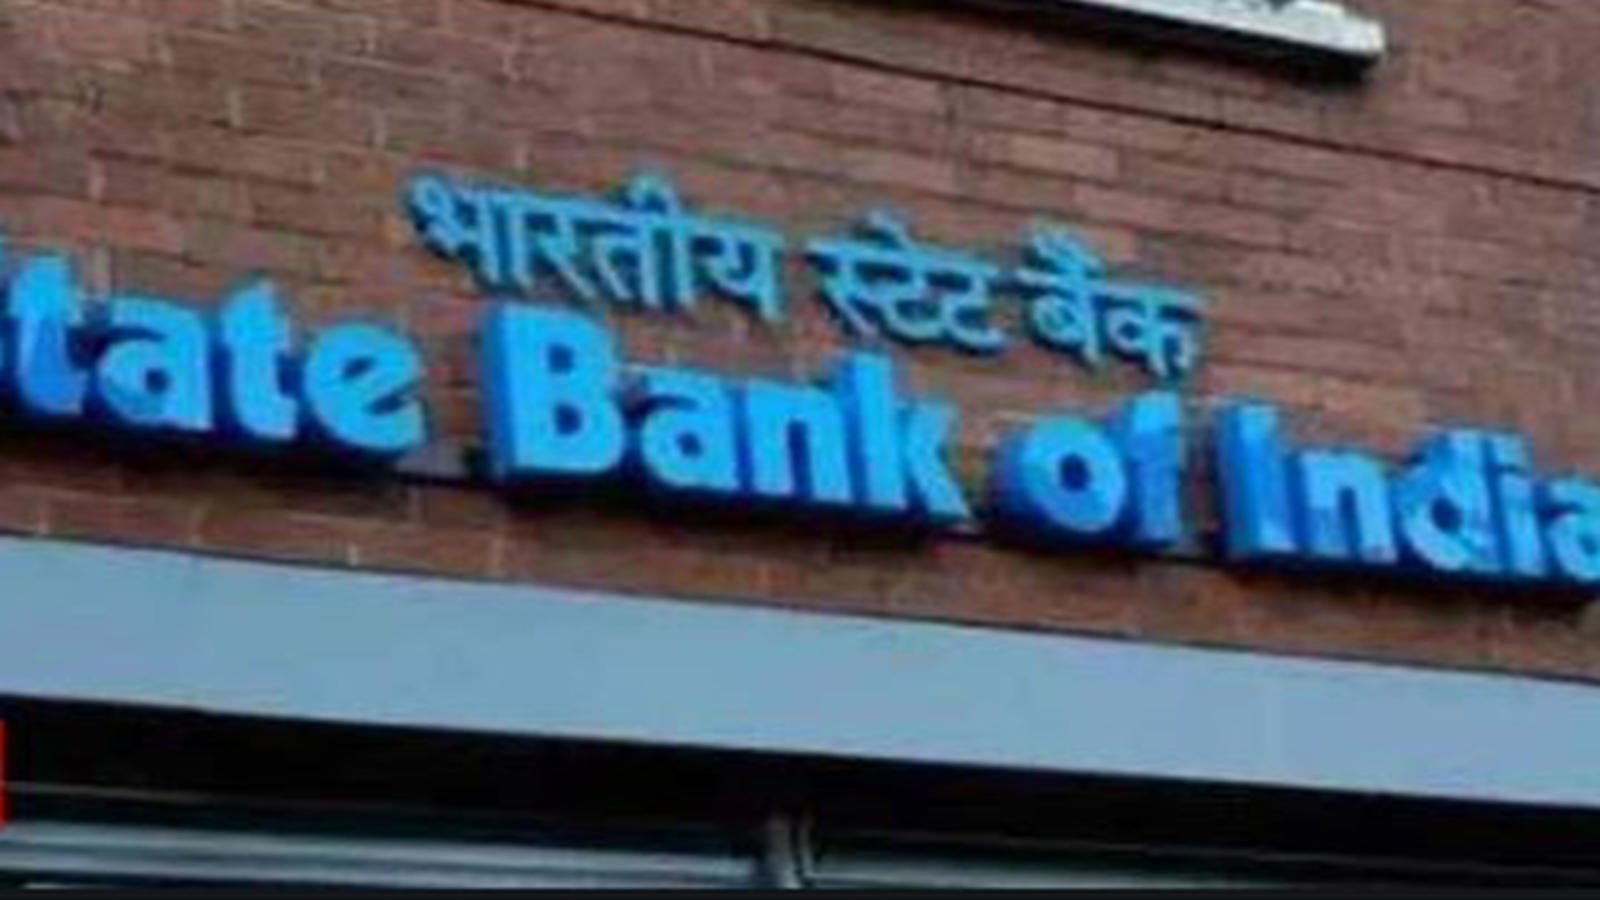 SBI under reported bad loans by RS 11932 crore in FY19 finds RBI